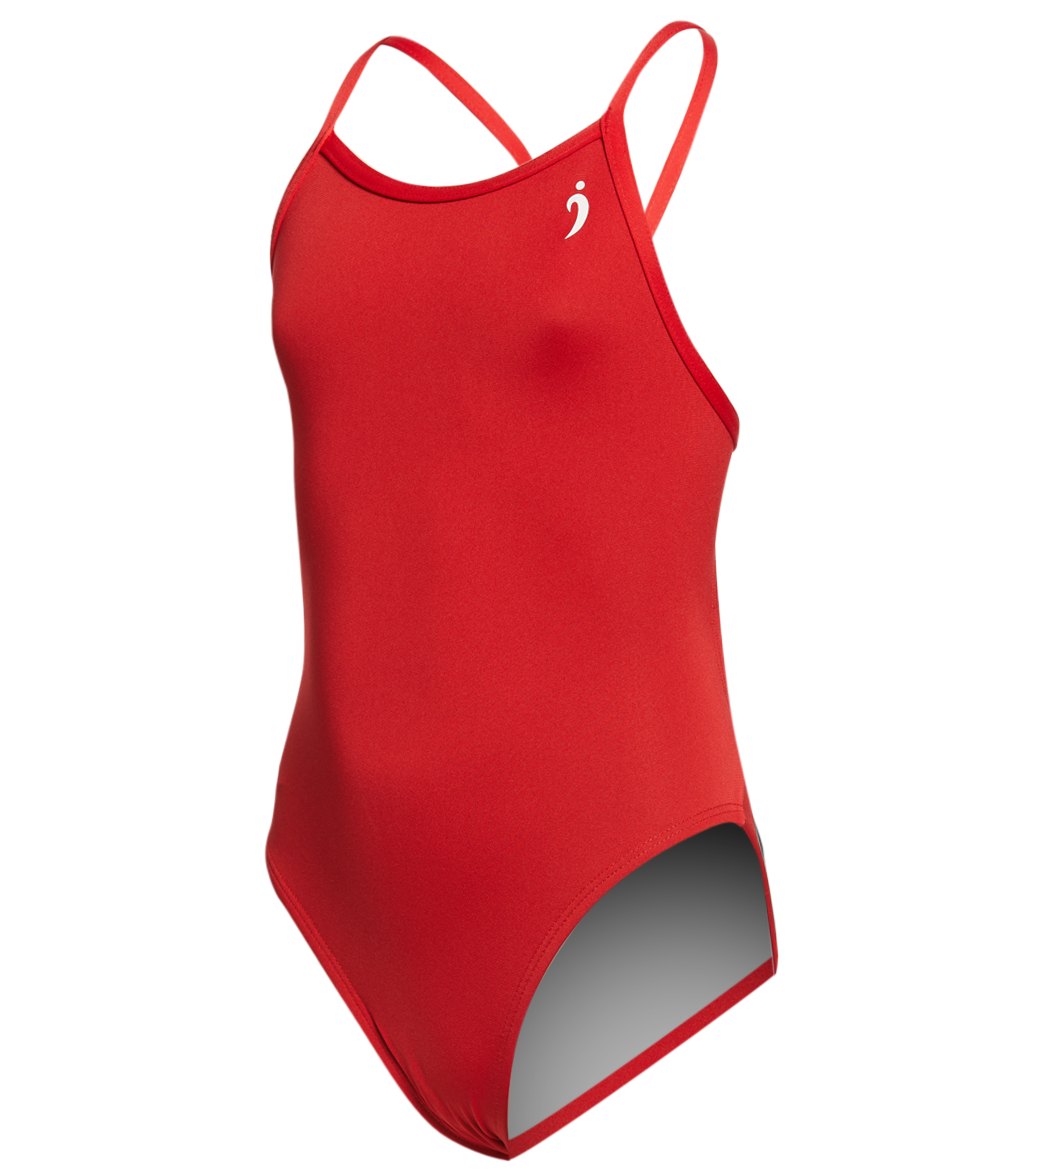 Illusions Activewear Girls' Max Red Thin Strap One Piece Swimsuit at ...